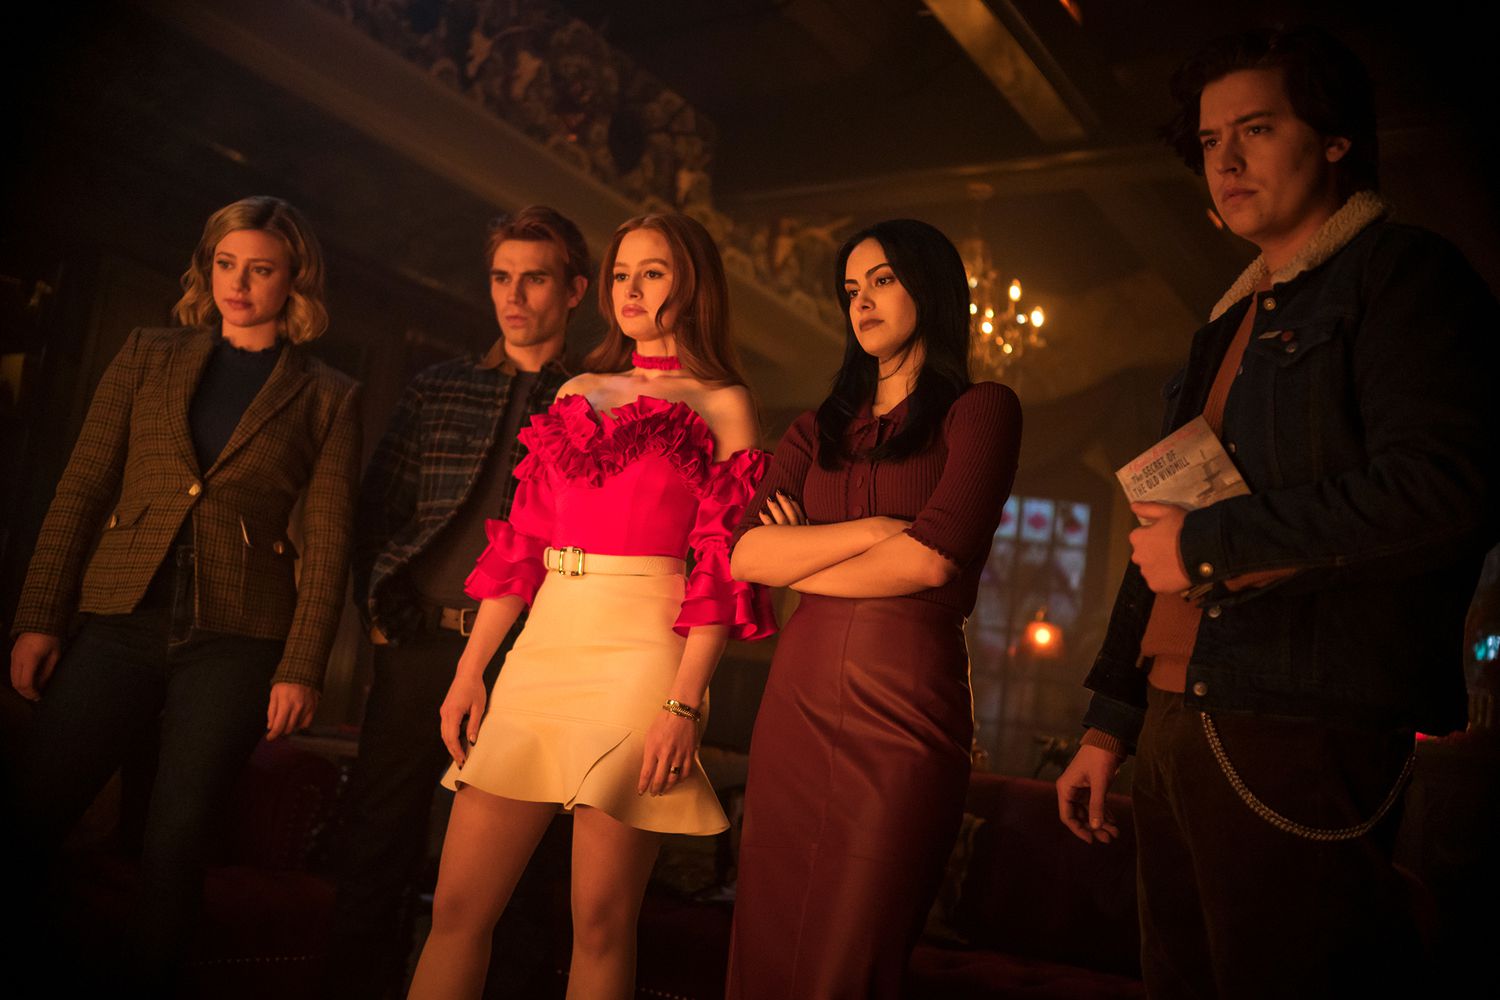 Lili Reinhart as Betty Cooper, KJ Apa as Archie Andrews, Madelaine Petsch as Cheryl Blossom, Camila Mendes as Veronica Lodge and Cole Sprouse as Jughead Jones in Riverdale